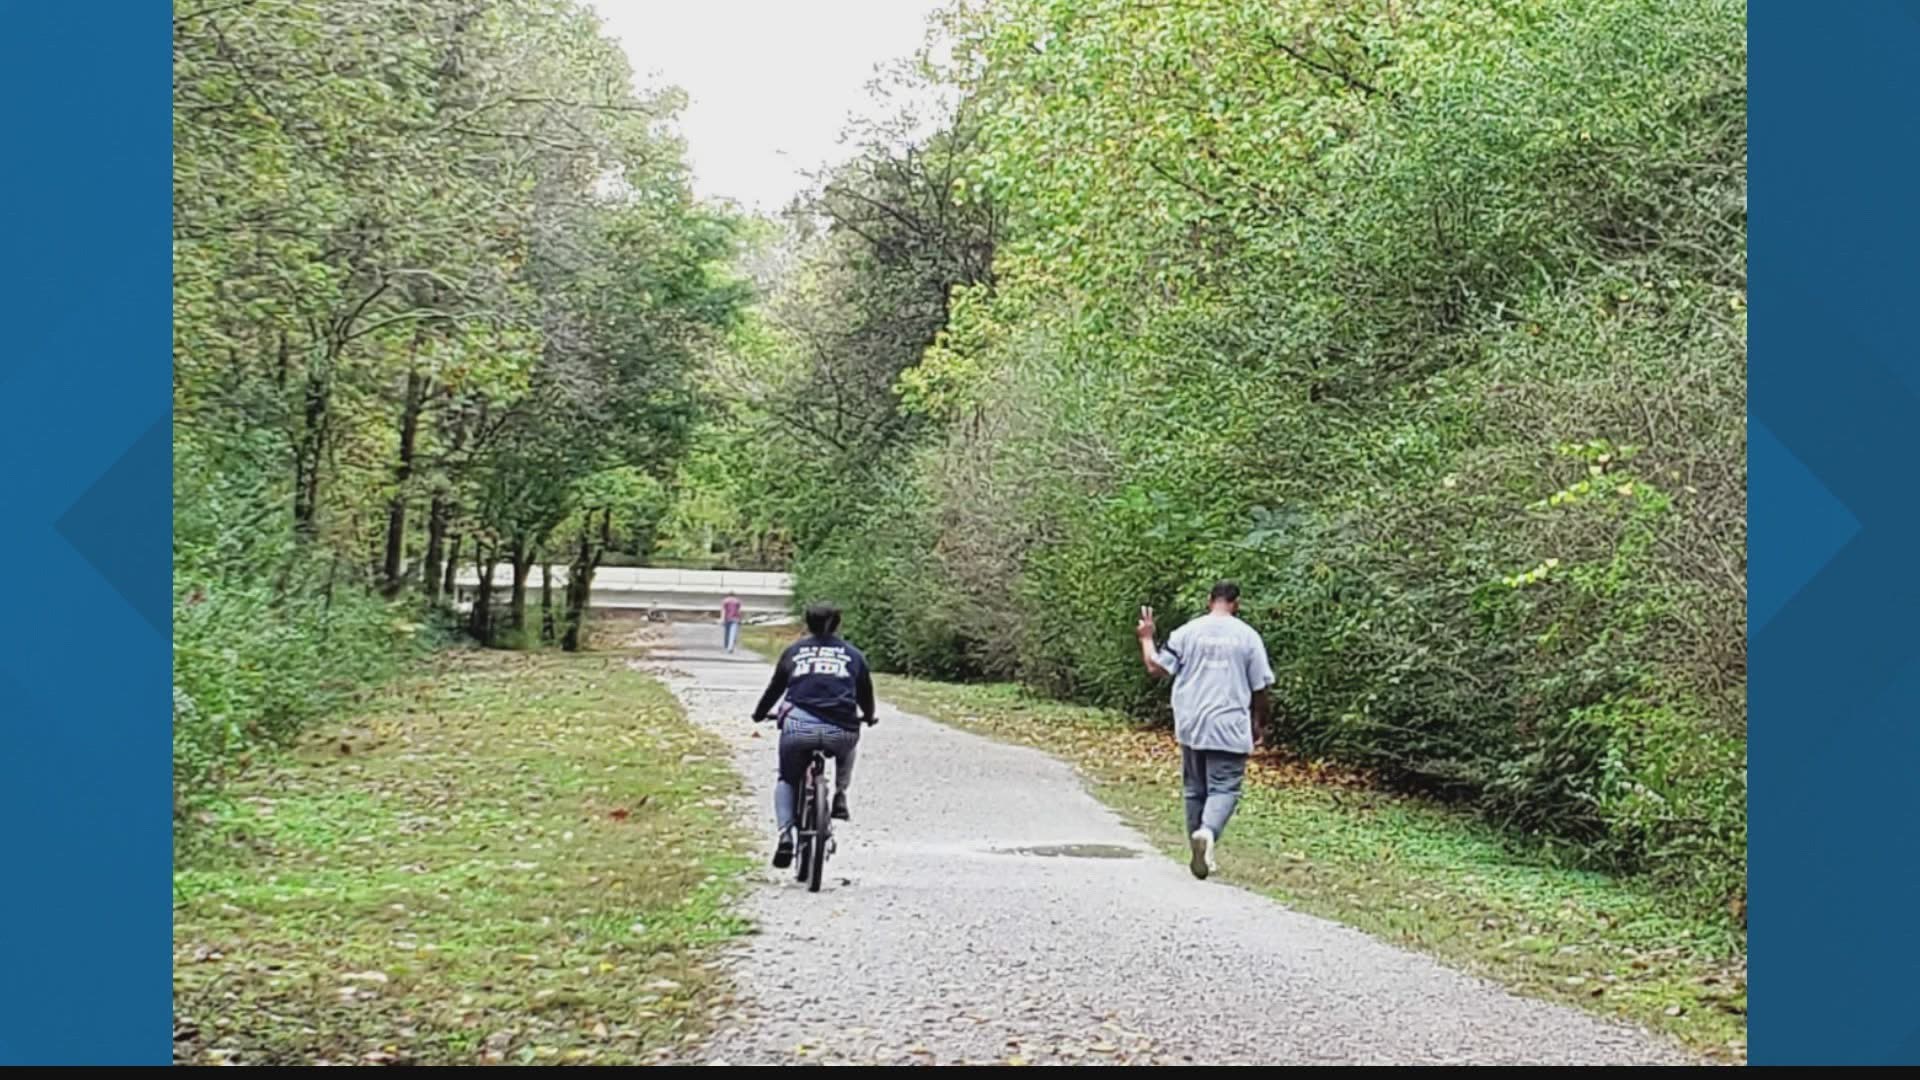 The grants will allow Athens to expand and improve the trail and facilities.